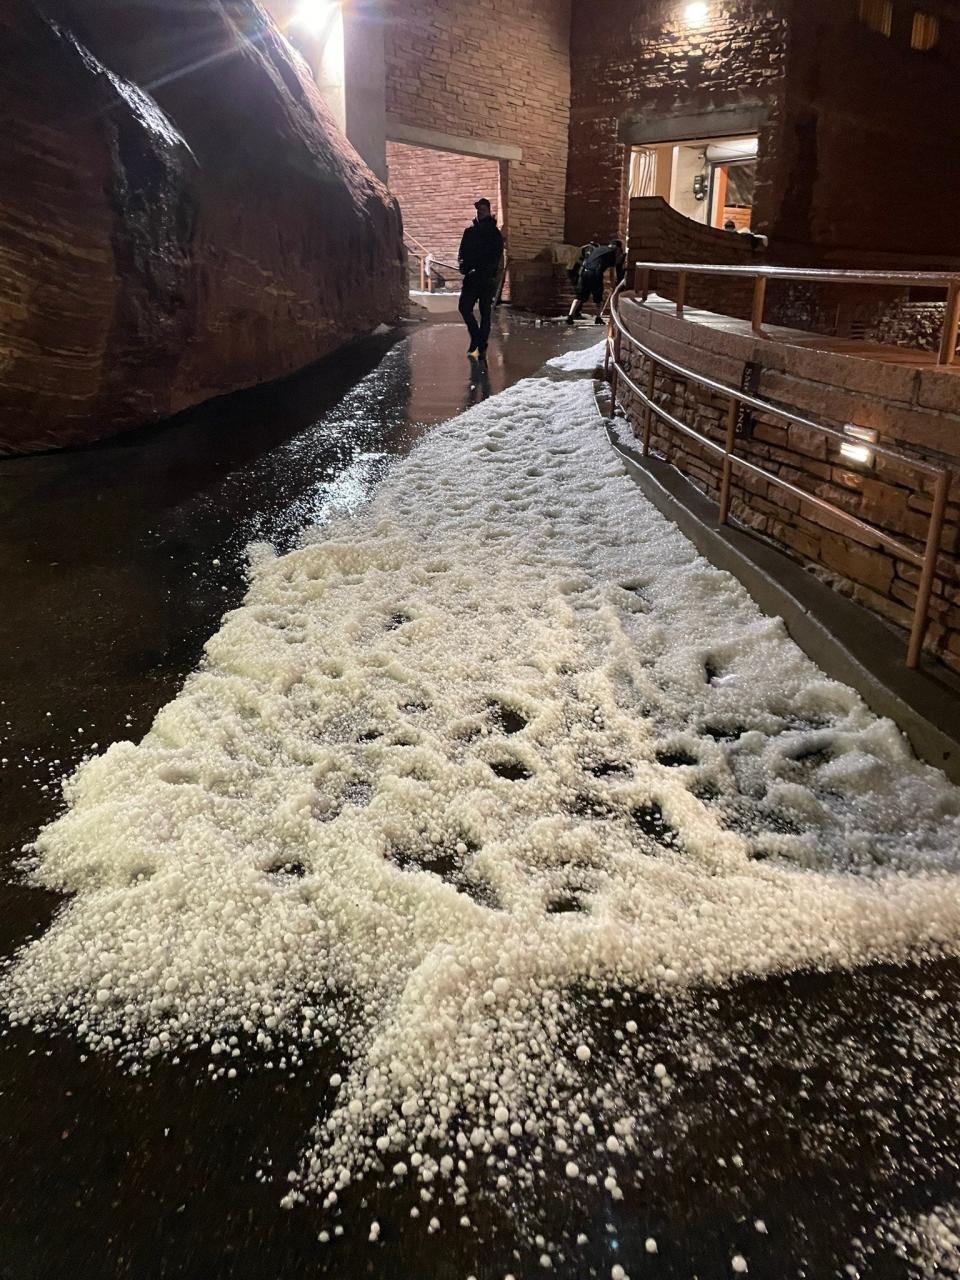 West Metro Fire Rescue said seven people were transported to hospitals with non-life threatening injuries after hail fell on Red Rocks Amphitheater Wednesday night.